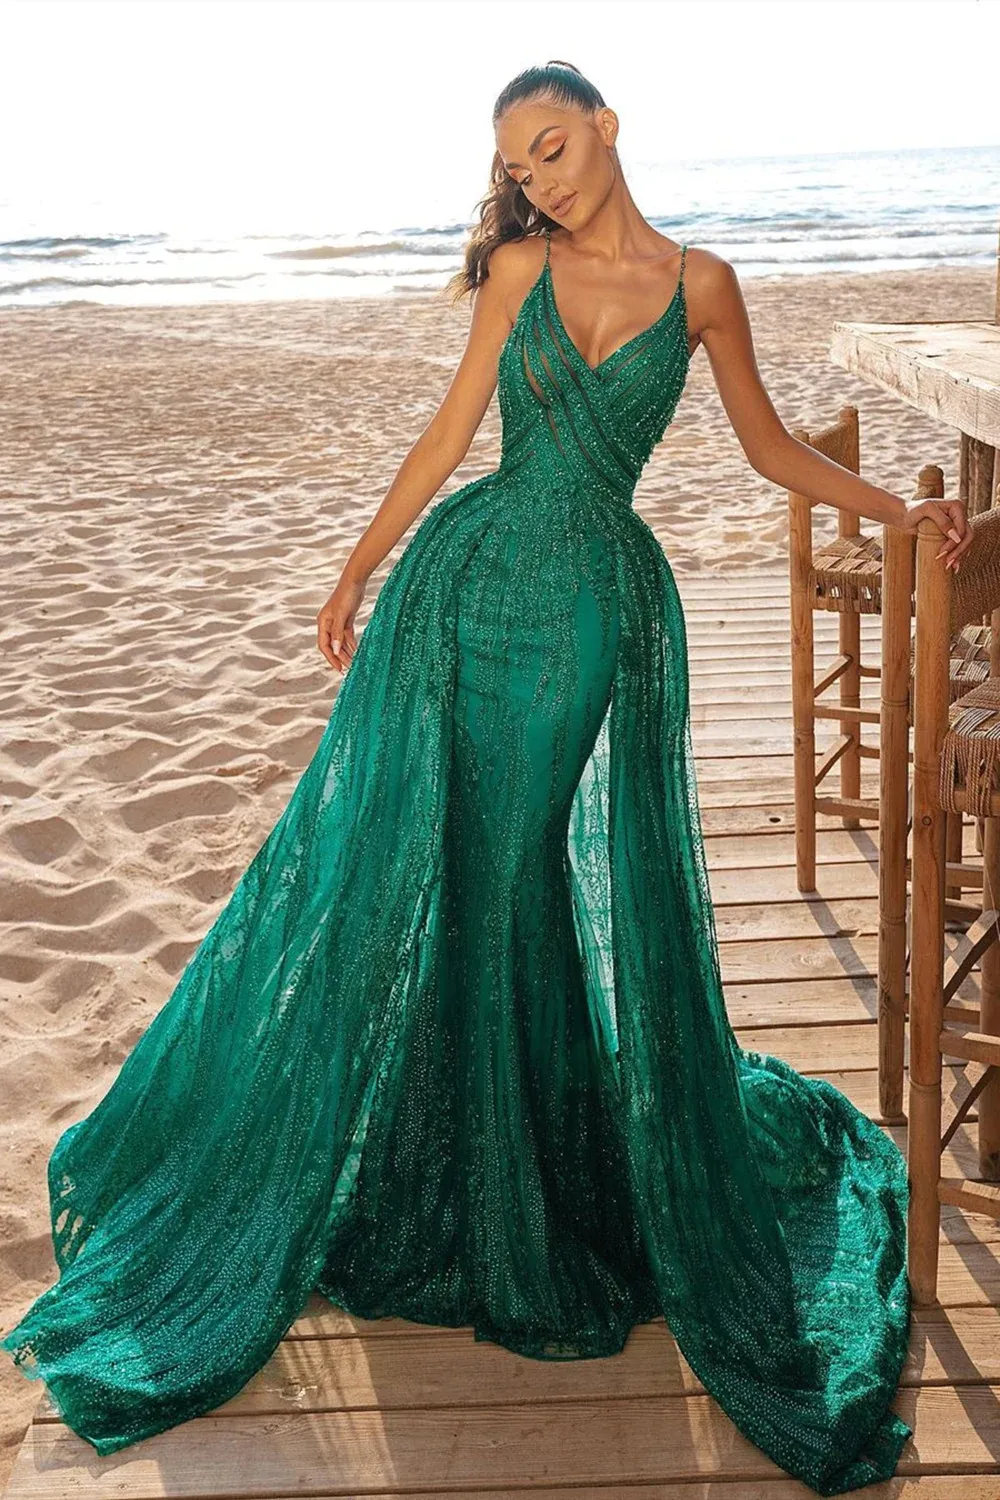 Elegant Jade Green Mermaid Prom Dresses With Beading Appliques Sleeveless Tulle Satin Evening Gowns Overskirt Sexy Spaghetti Straps